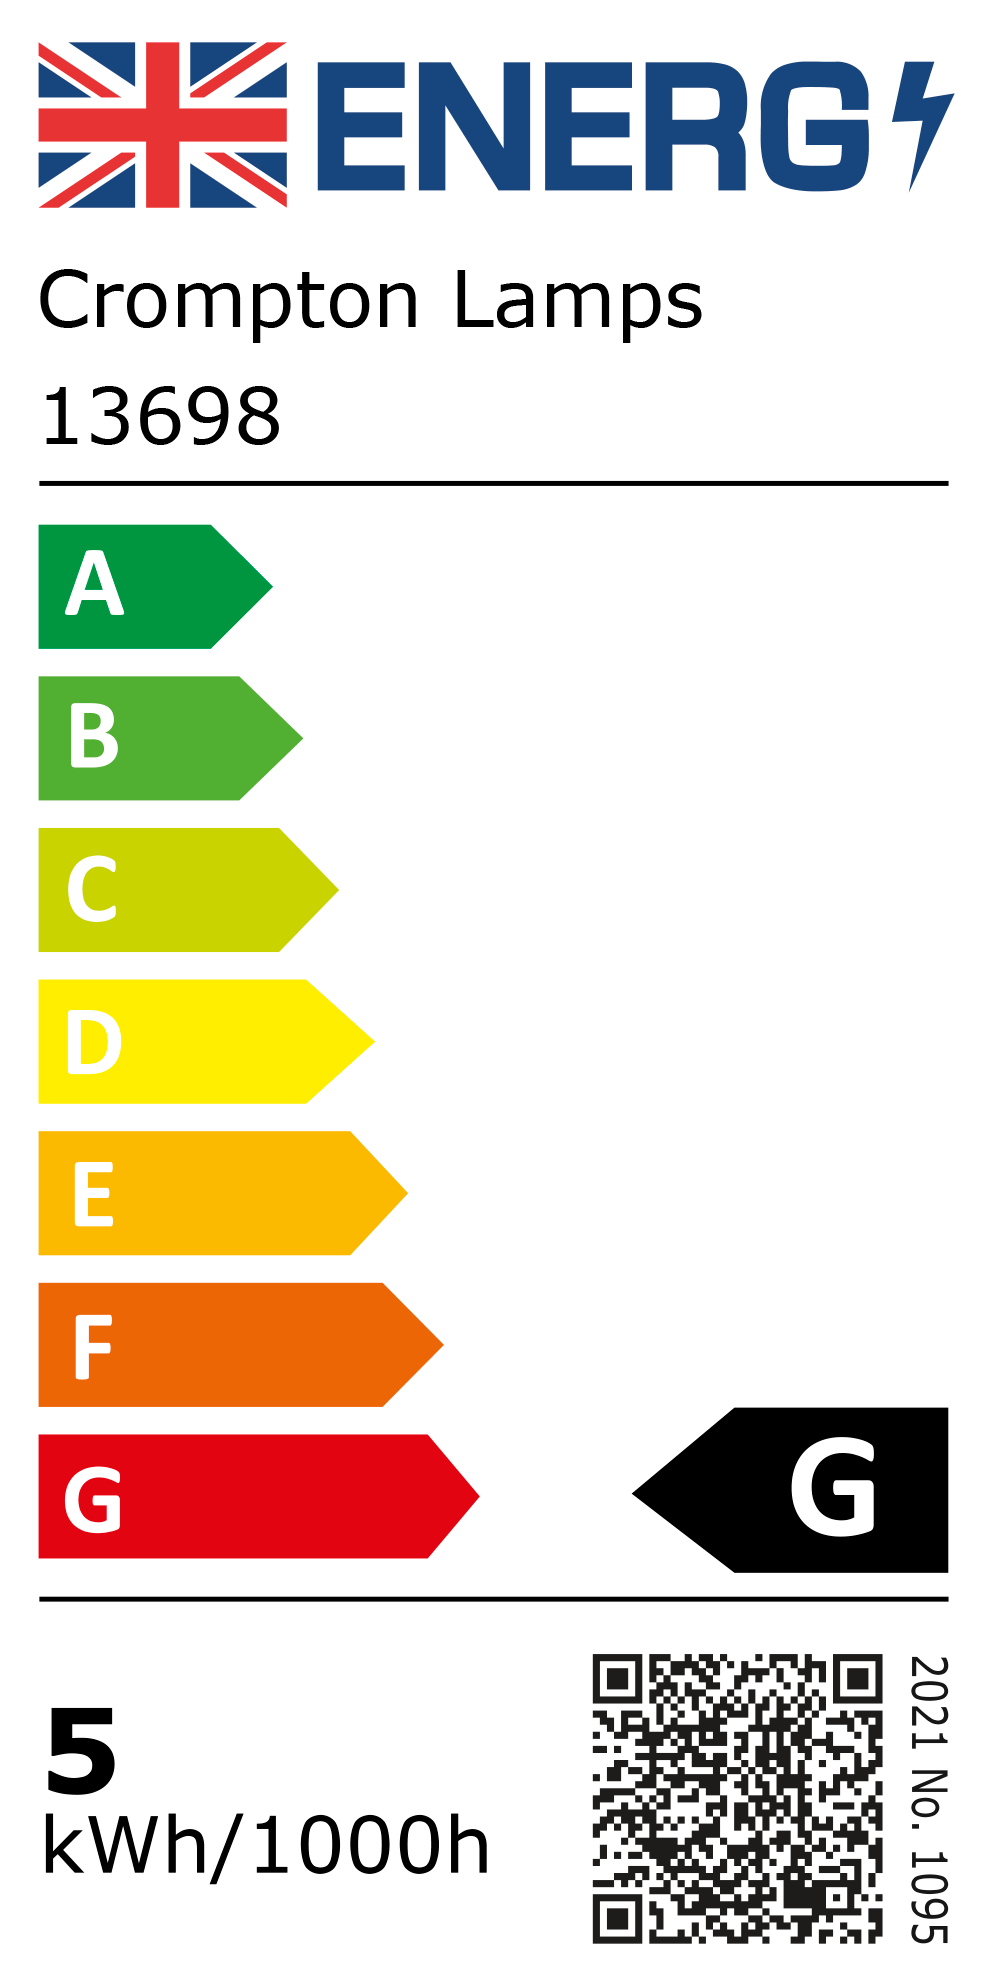 New 2021 Energy Rating Label: Stock Code 13698